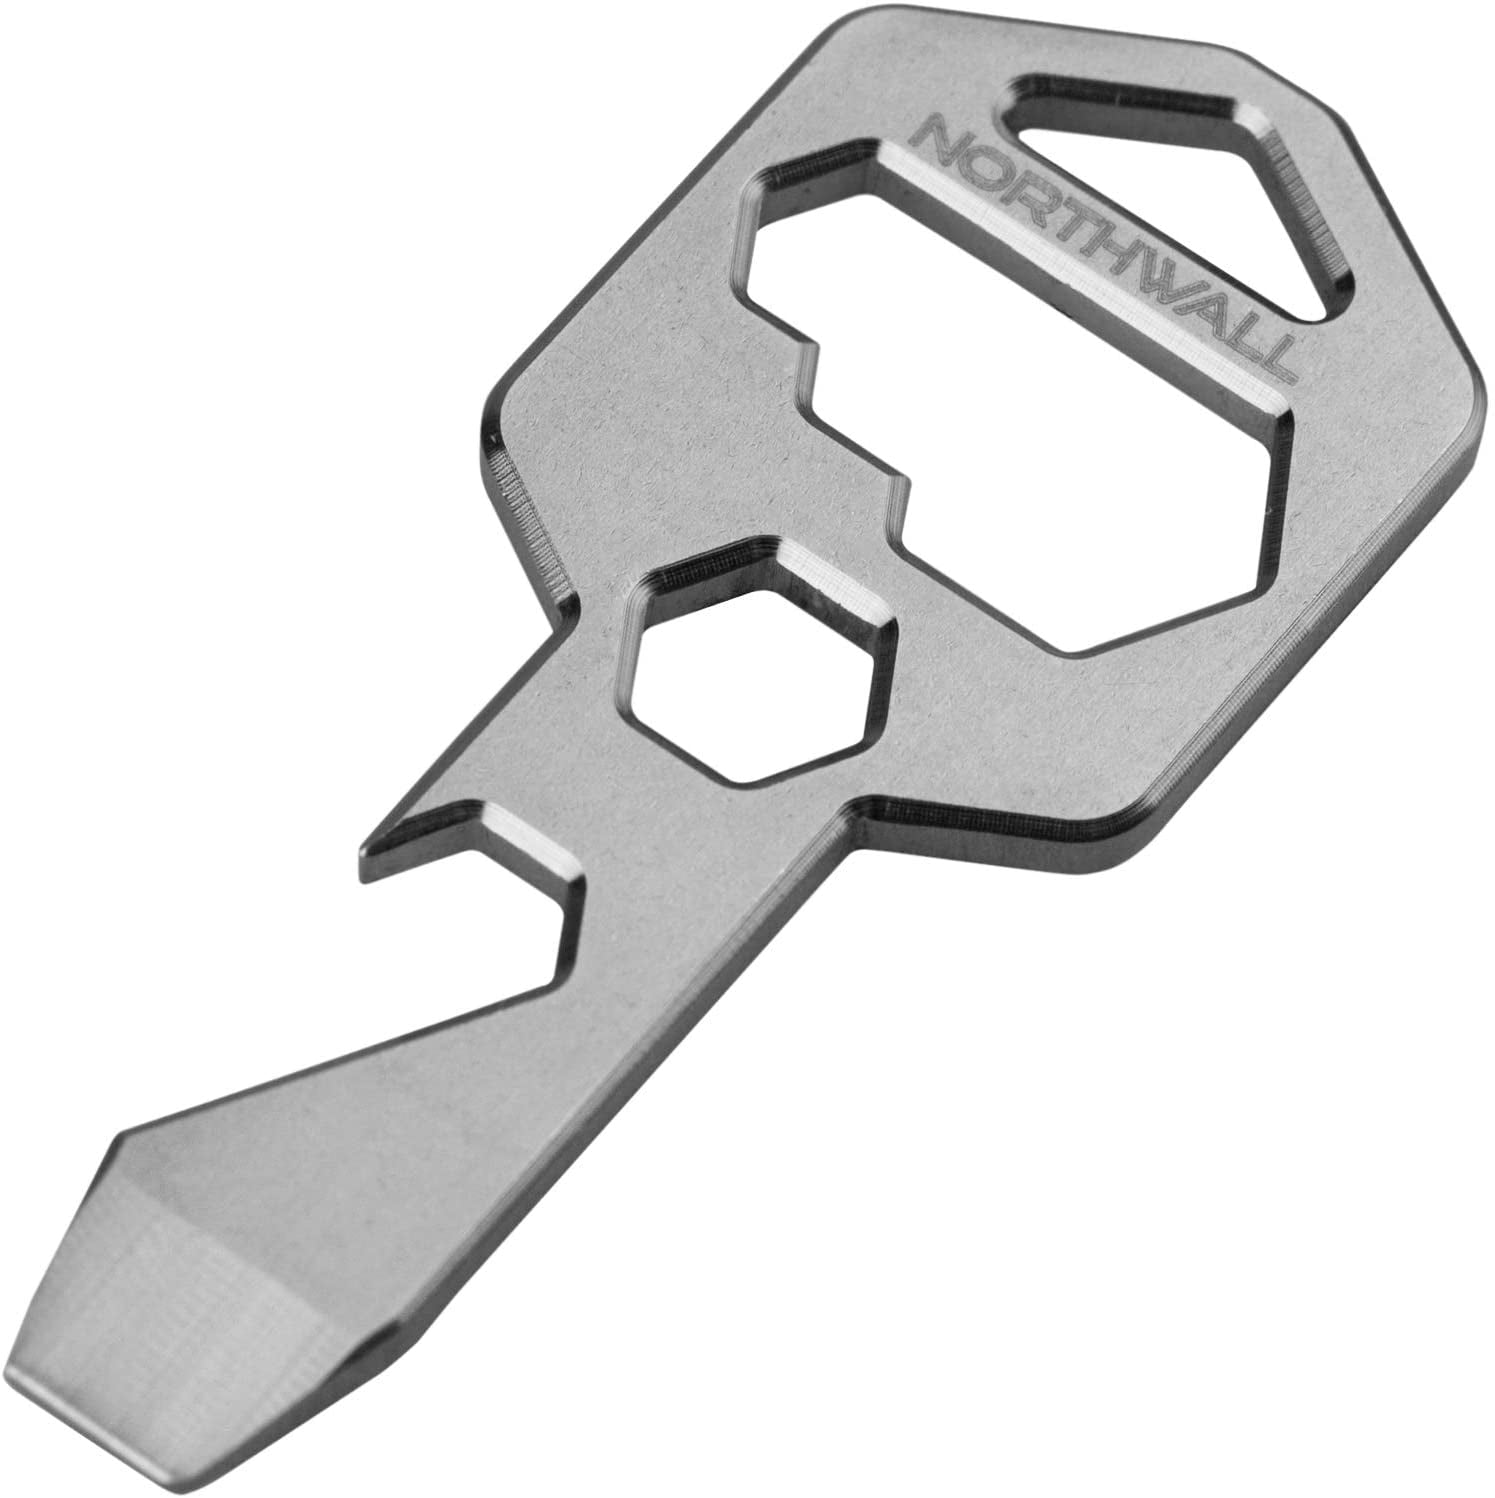 FREE SHIPPING Snap On Tools Wrench Shaped Keychain Bottle Opener Extreme Green 